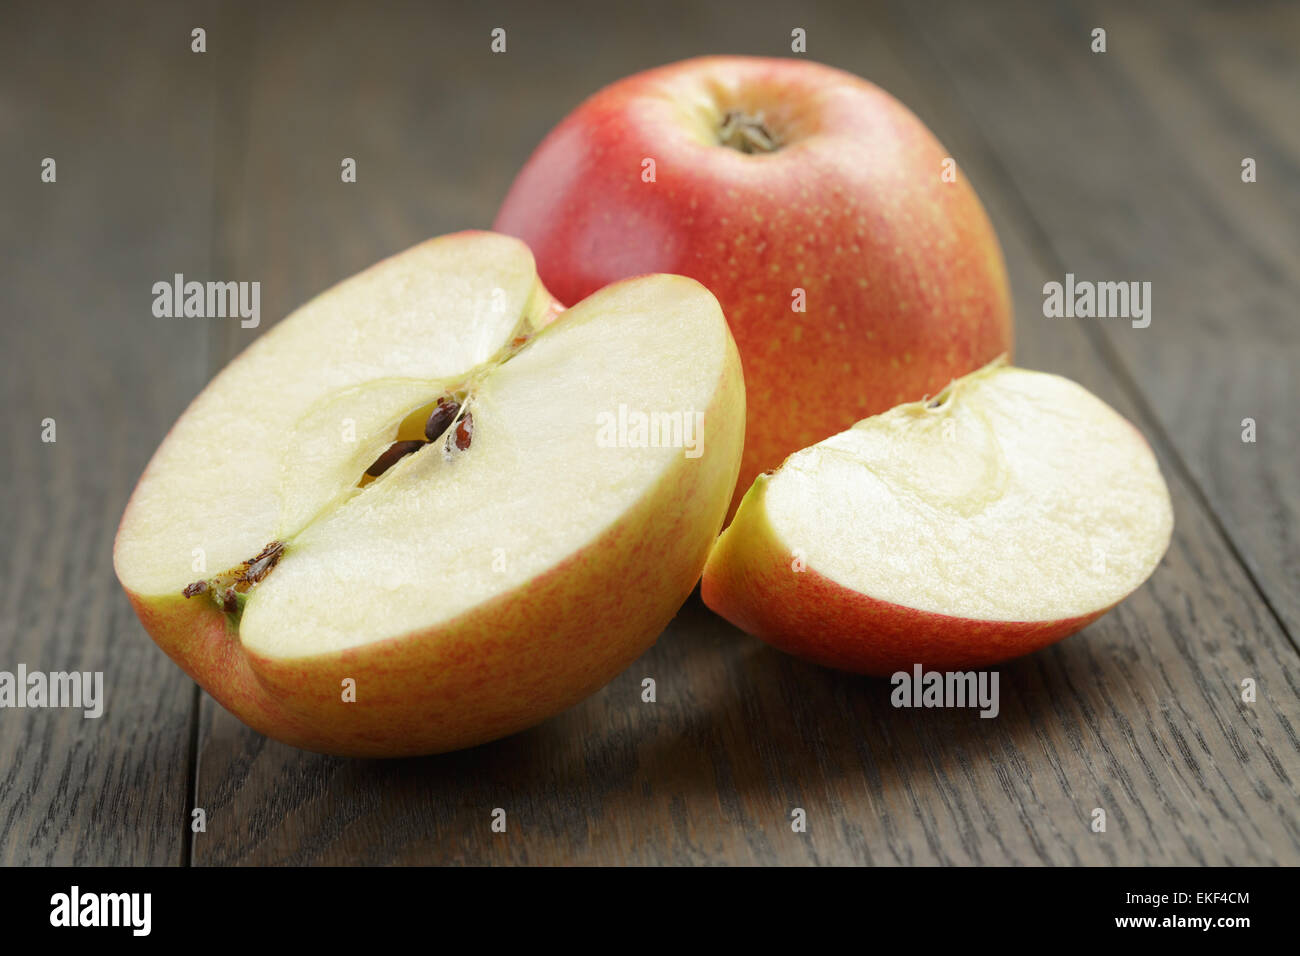 seasonal red apples sliced on wooden table Stock Photo